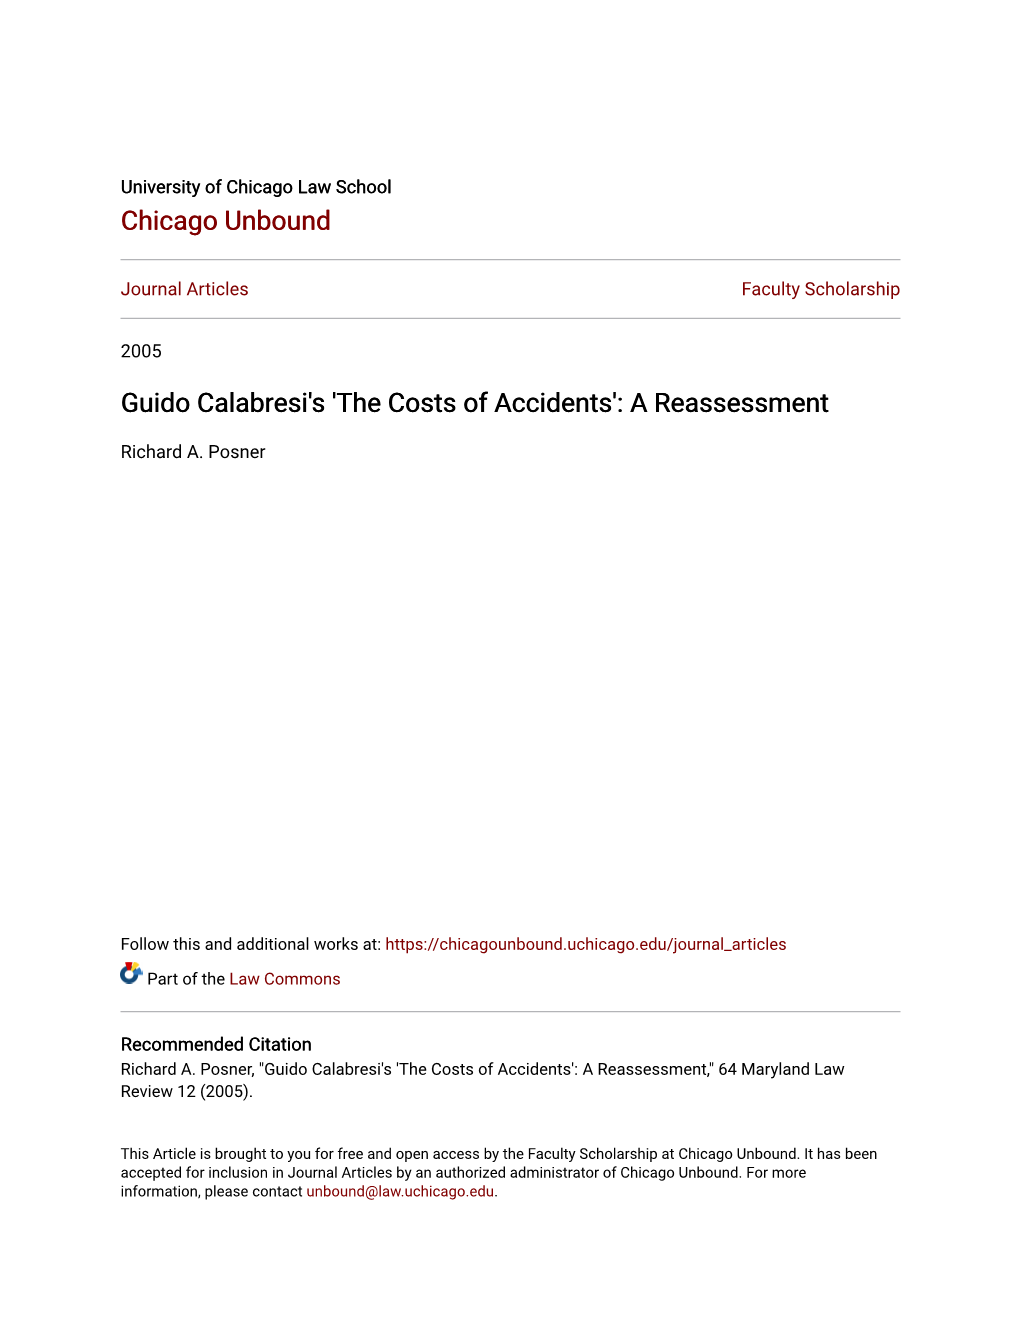 Guido Calabresi's 'The Costs of Accidents': a Reassessment